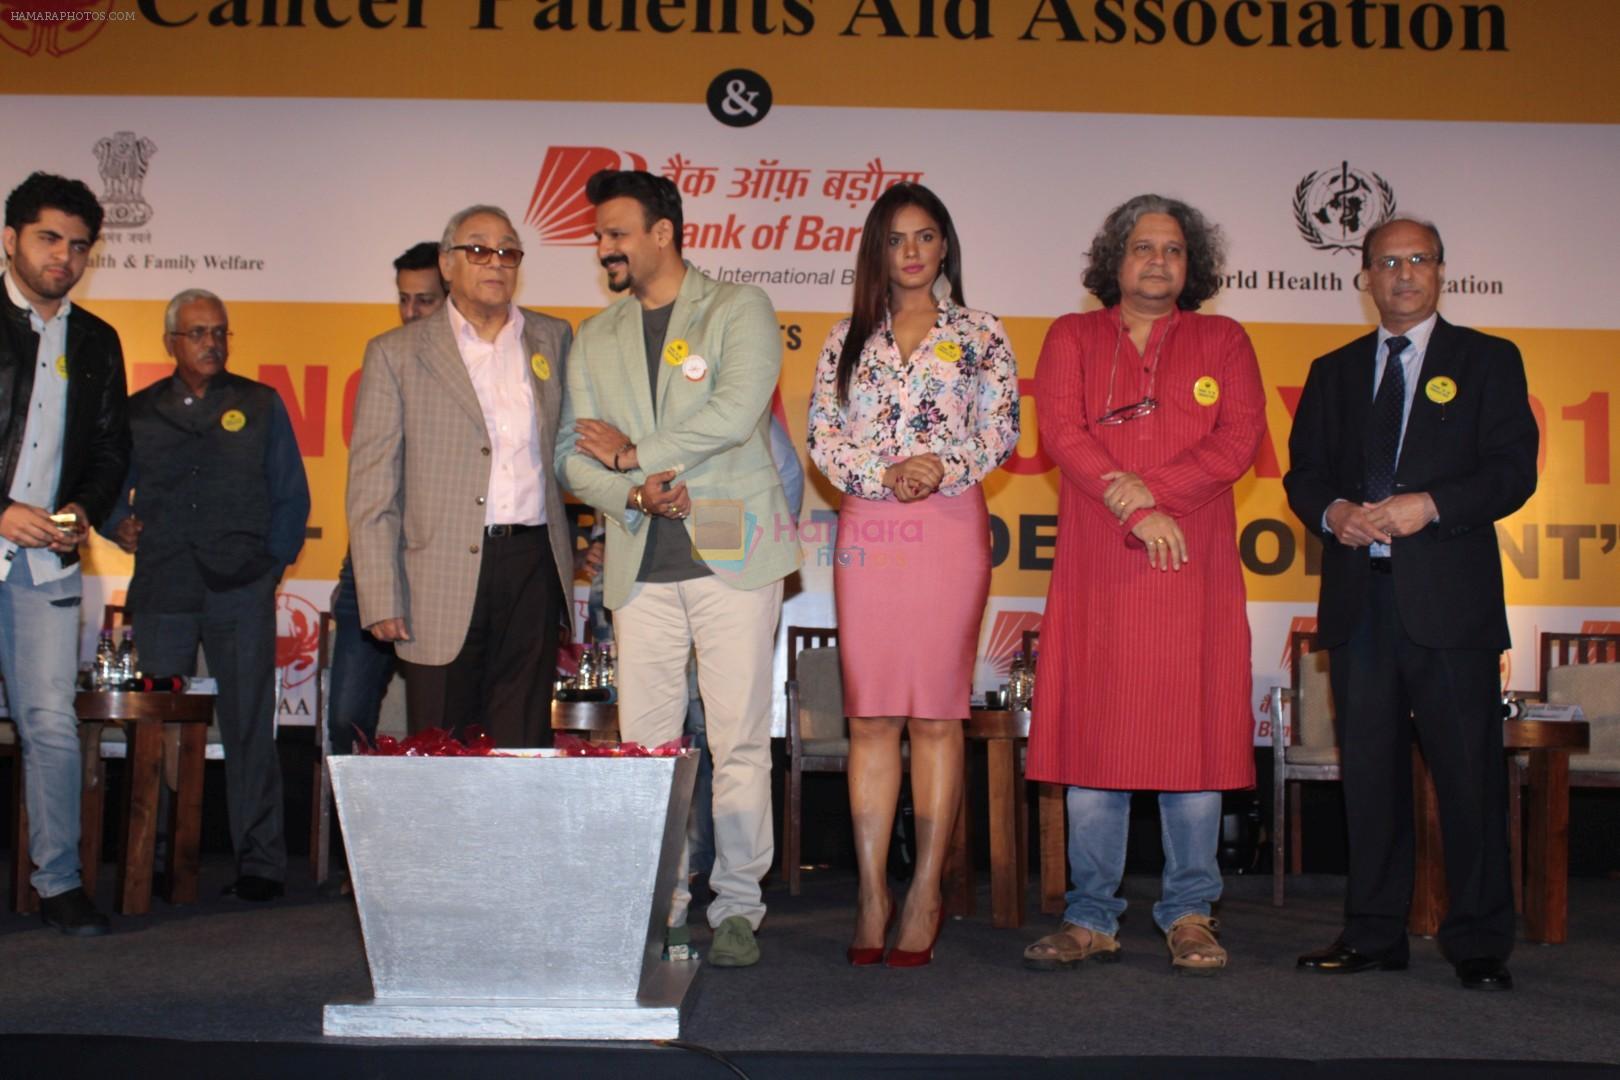 Vivek Oberoi, Neetu Chandra at the Press Conference To Say No To Tobacco & Yes To Life on 30th May 2017